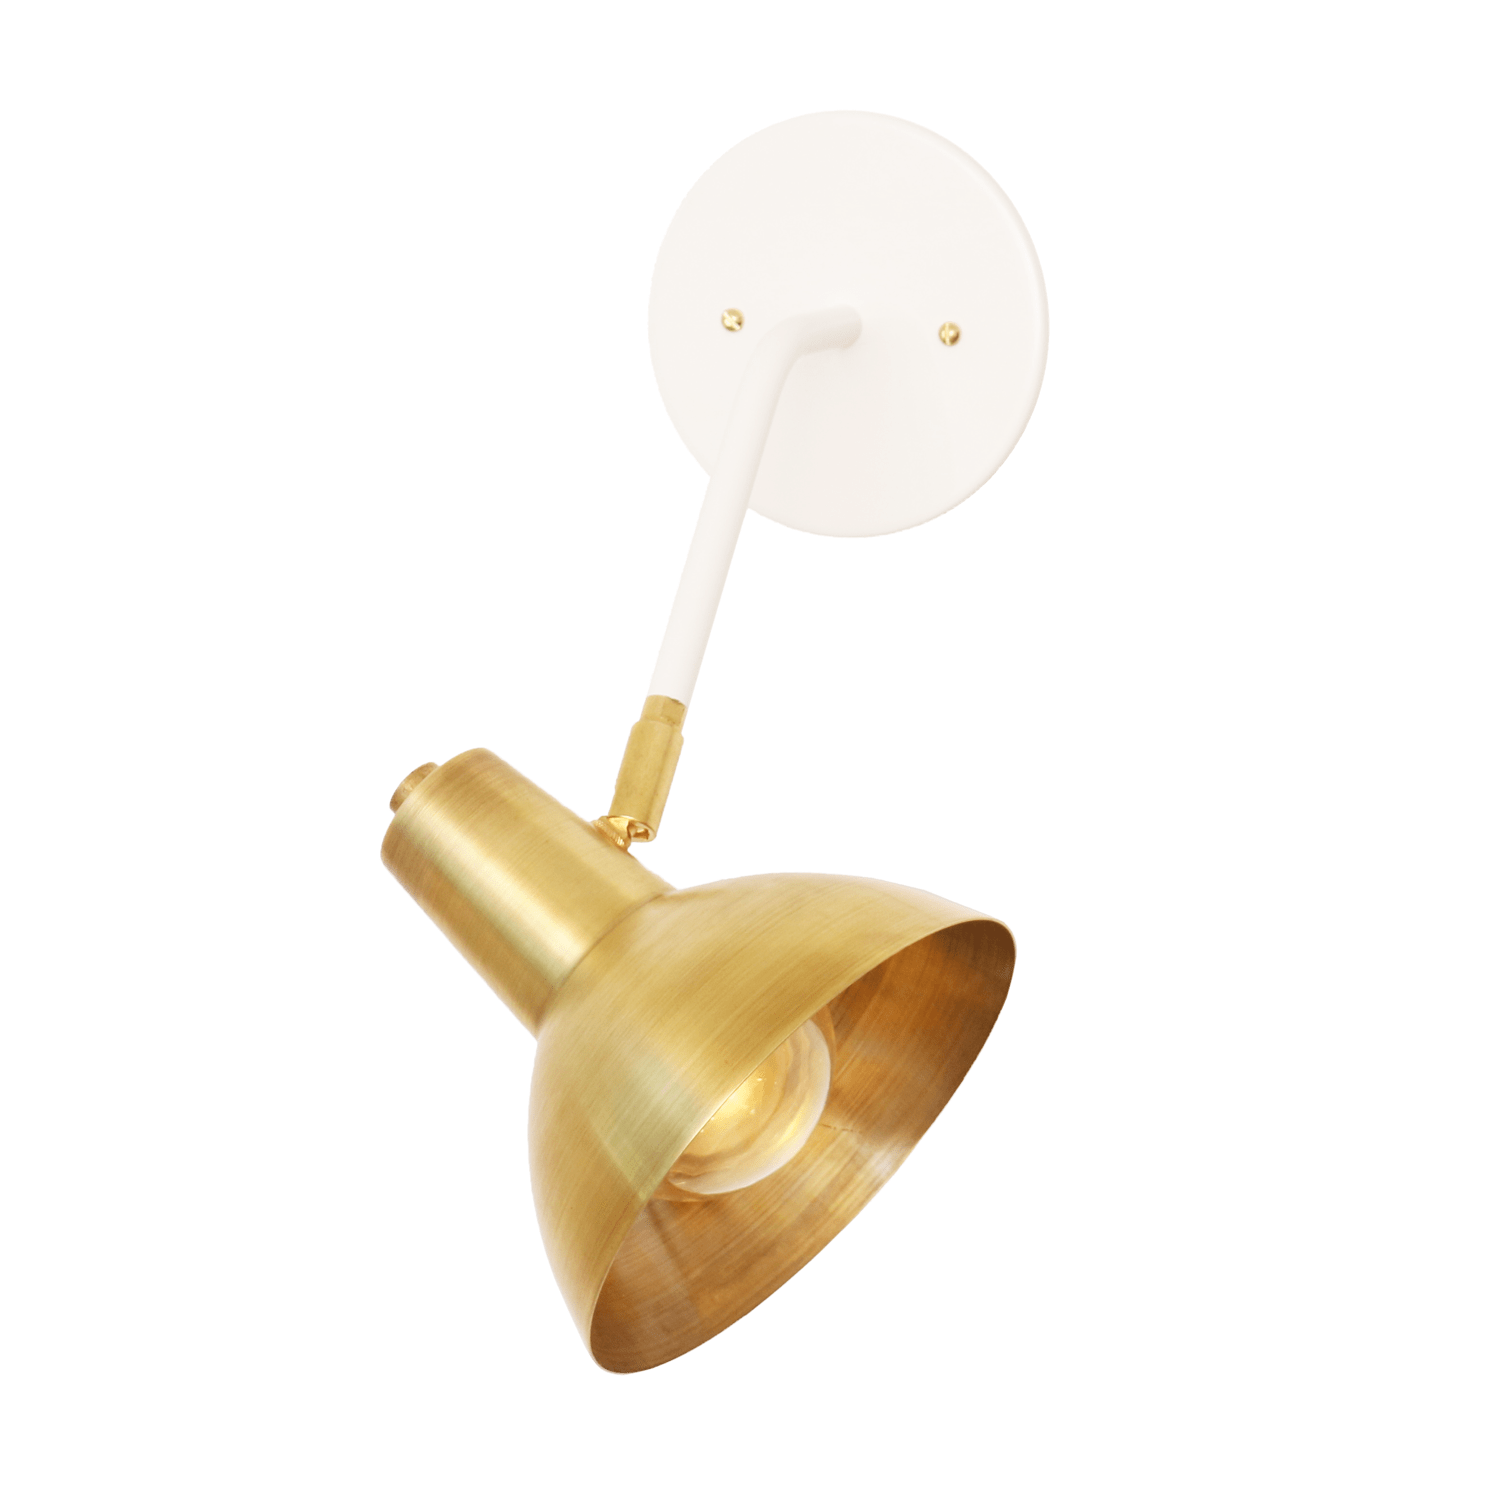 Genoa wall sconce White lamp / Brass shade / Brass hardware onefortythree